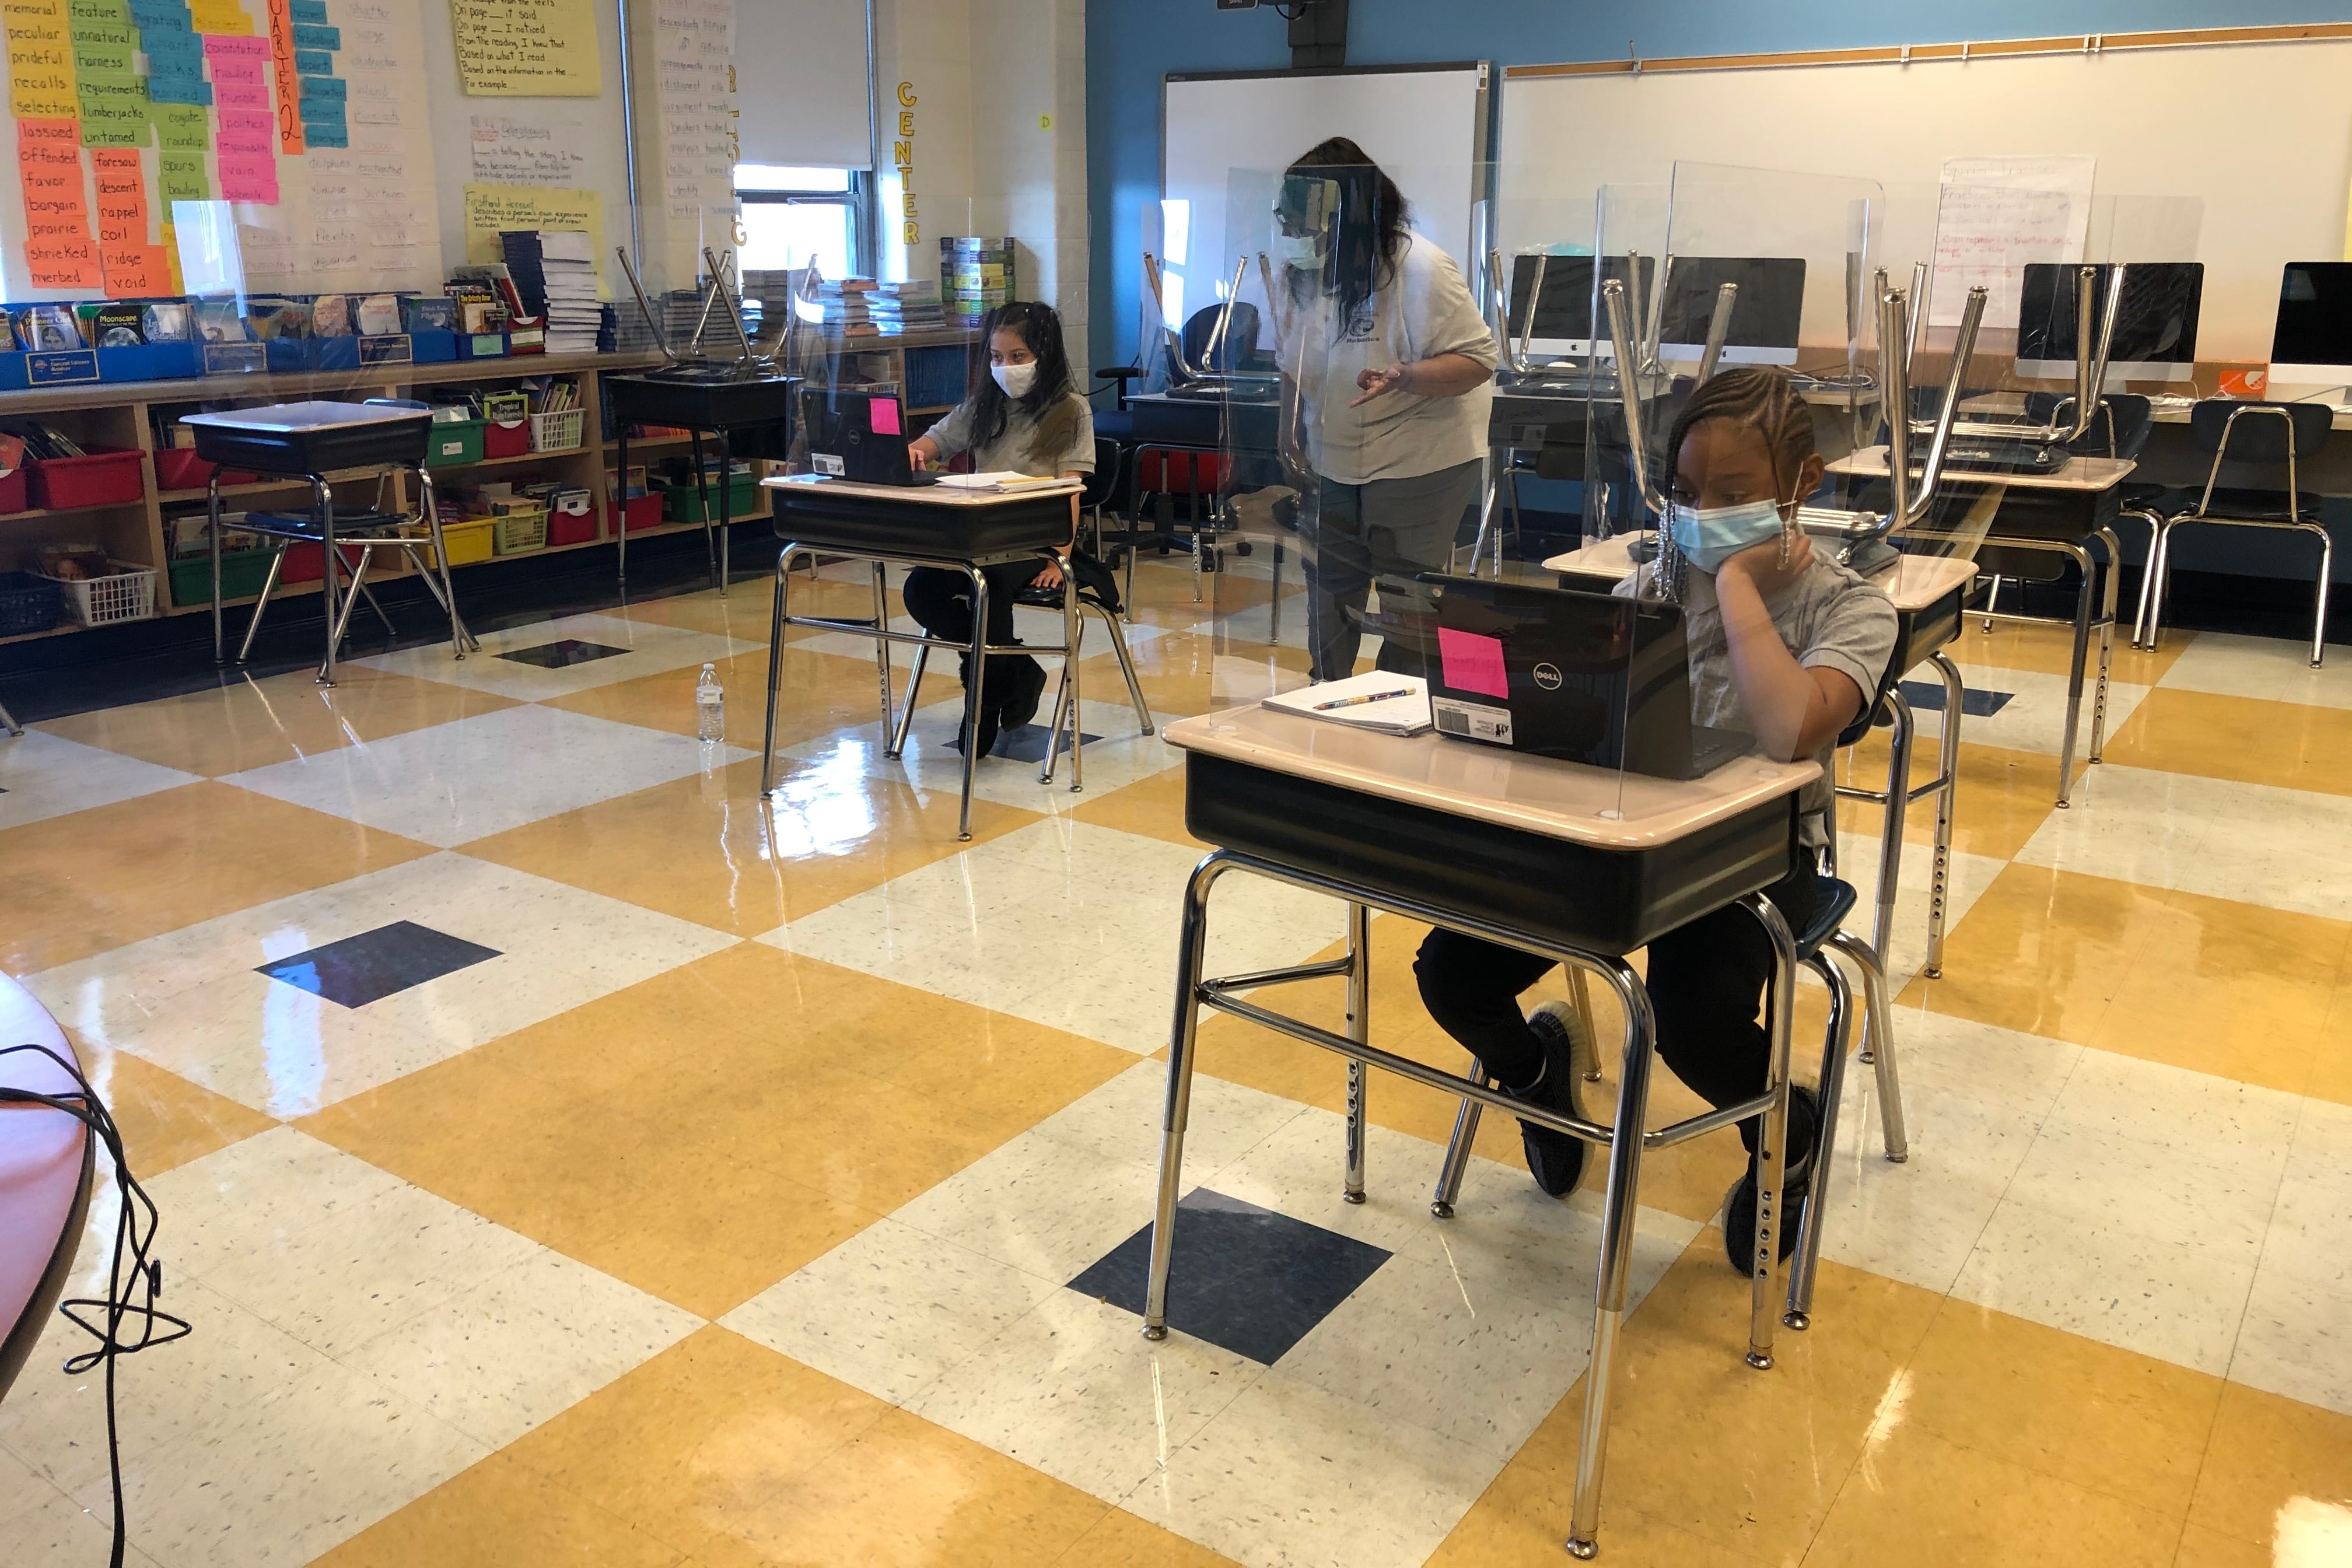 Students wearing face masks sit at desks behind plastic shields in a Chicago classroom with a yellow, cream, and black checkerboard floor and a blue wall. They are working on laptop computers as a teacher wearing a white top watches.